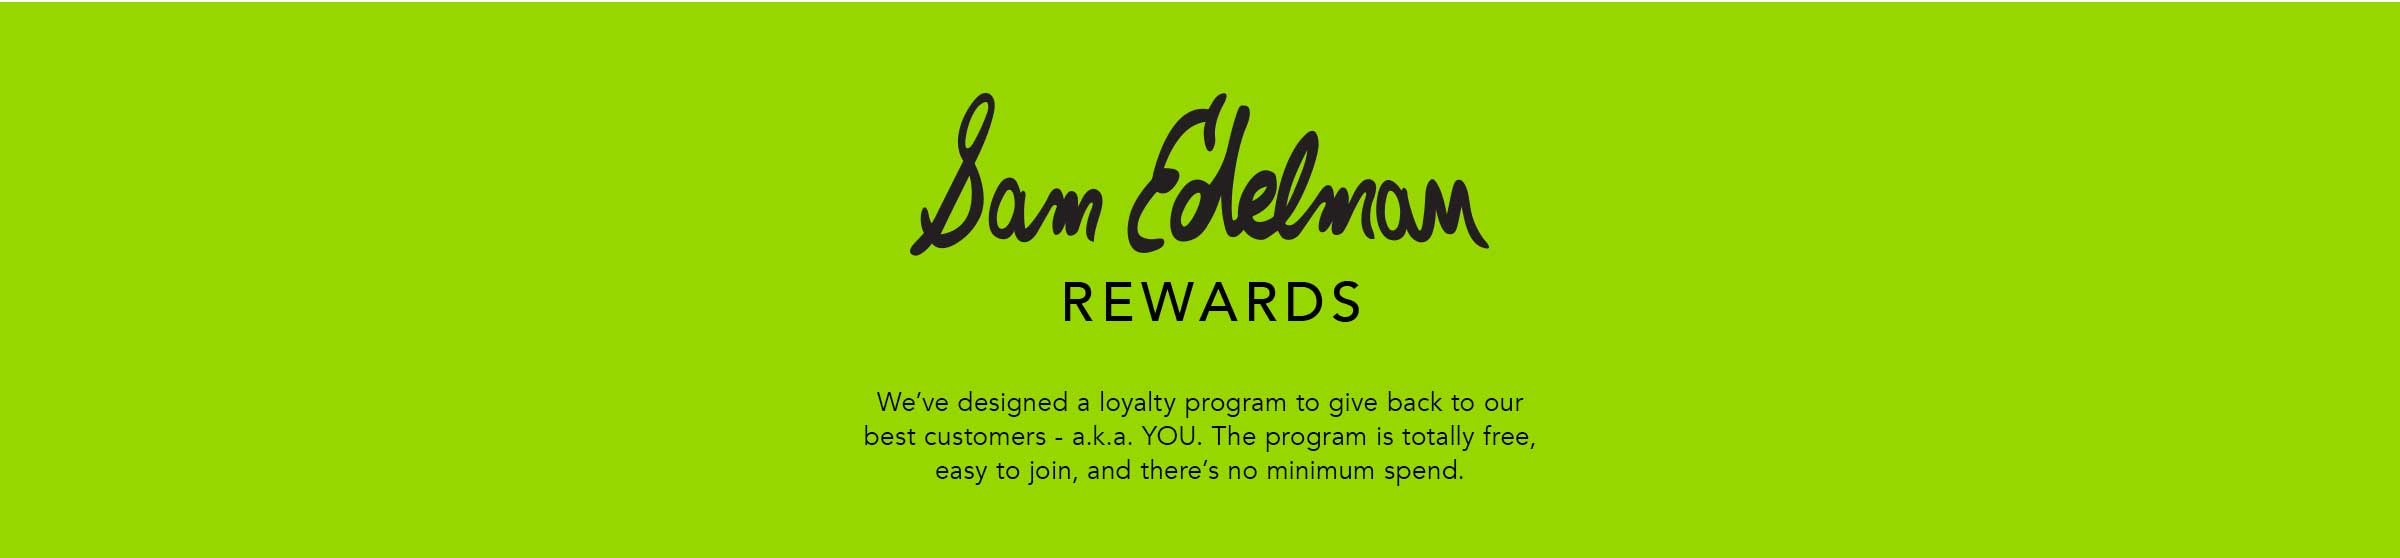 Sam Edelman Rewards. We've designed a loyalty program to give back to our best customers - a.k.a. YOU. The program is totally free, easy to join, and there's no minimum spend.